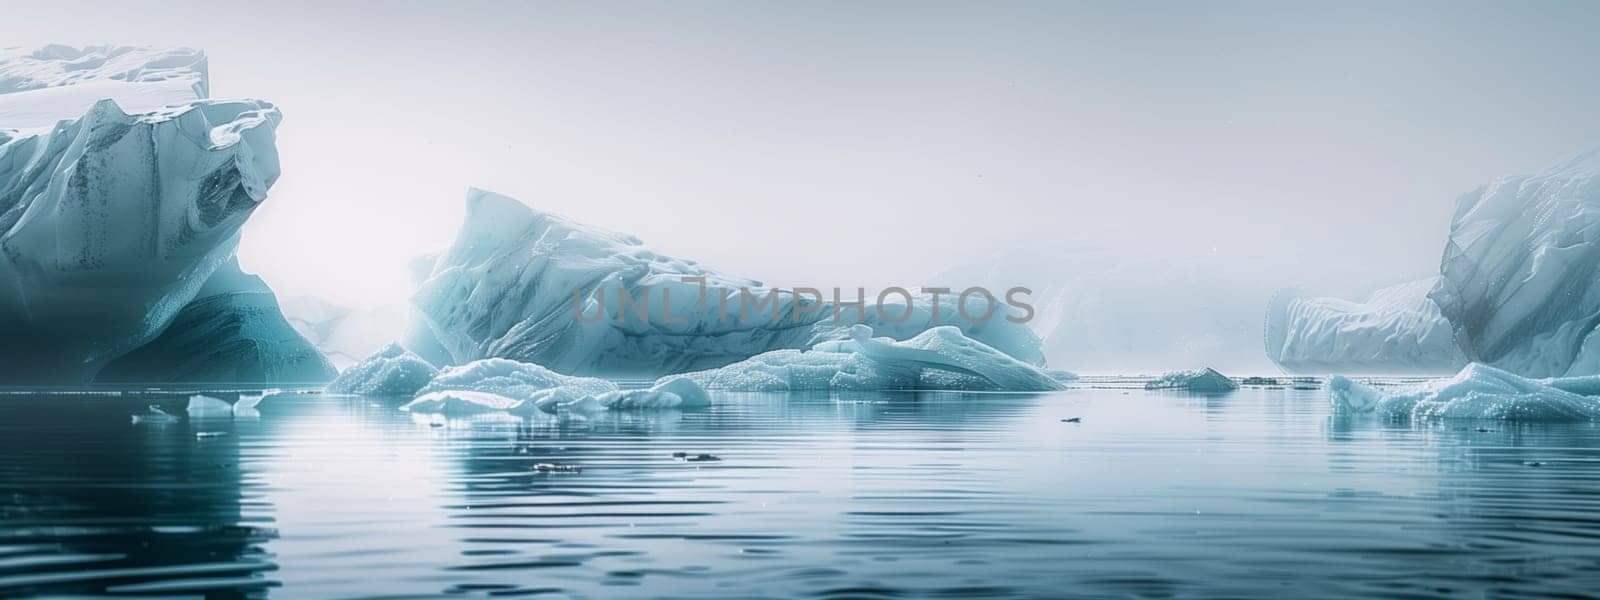 a group of icebergs floating on top of a body of water by richwolf